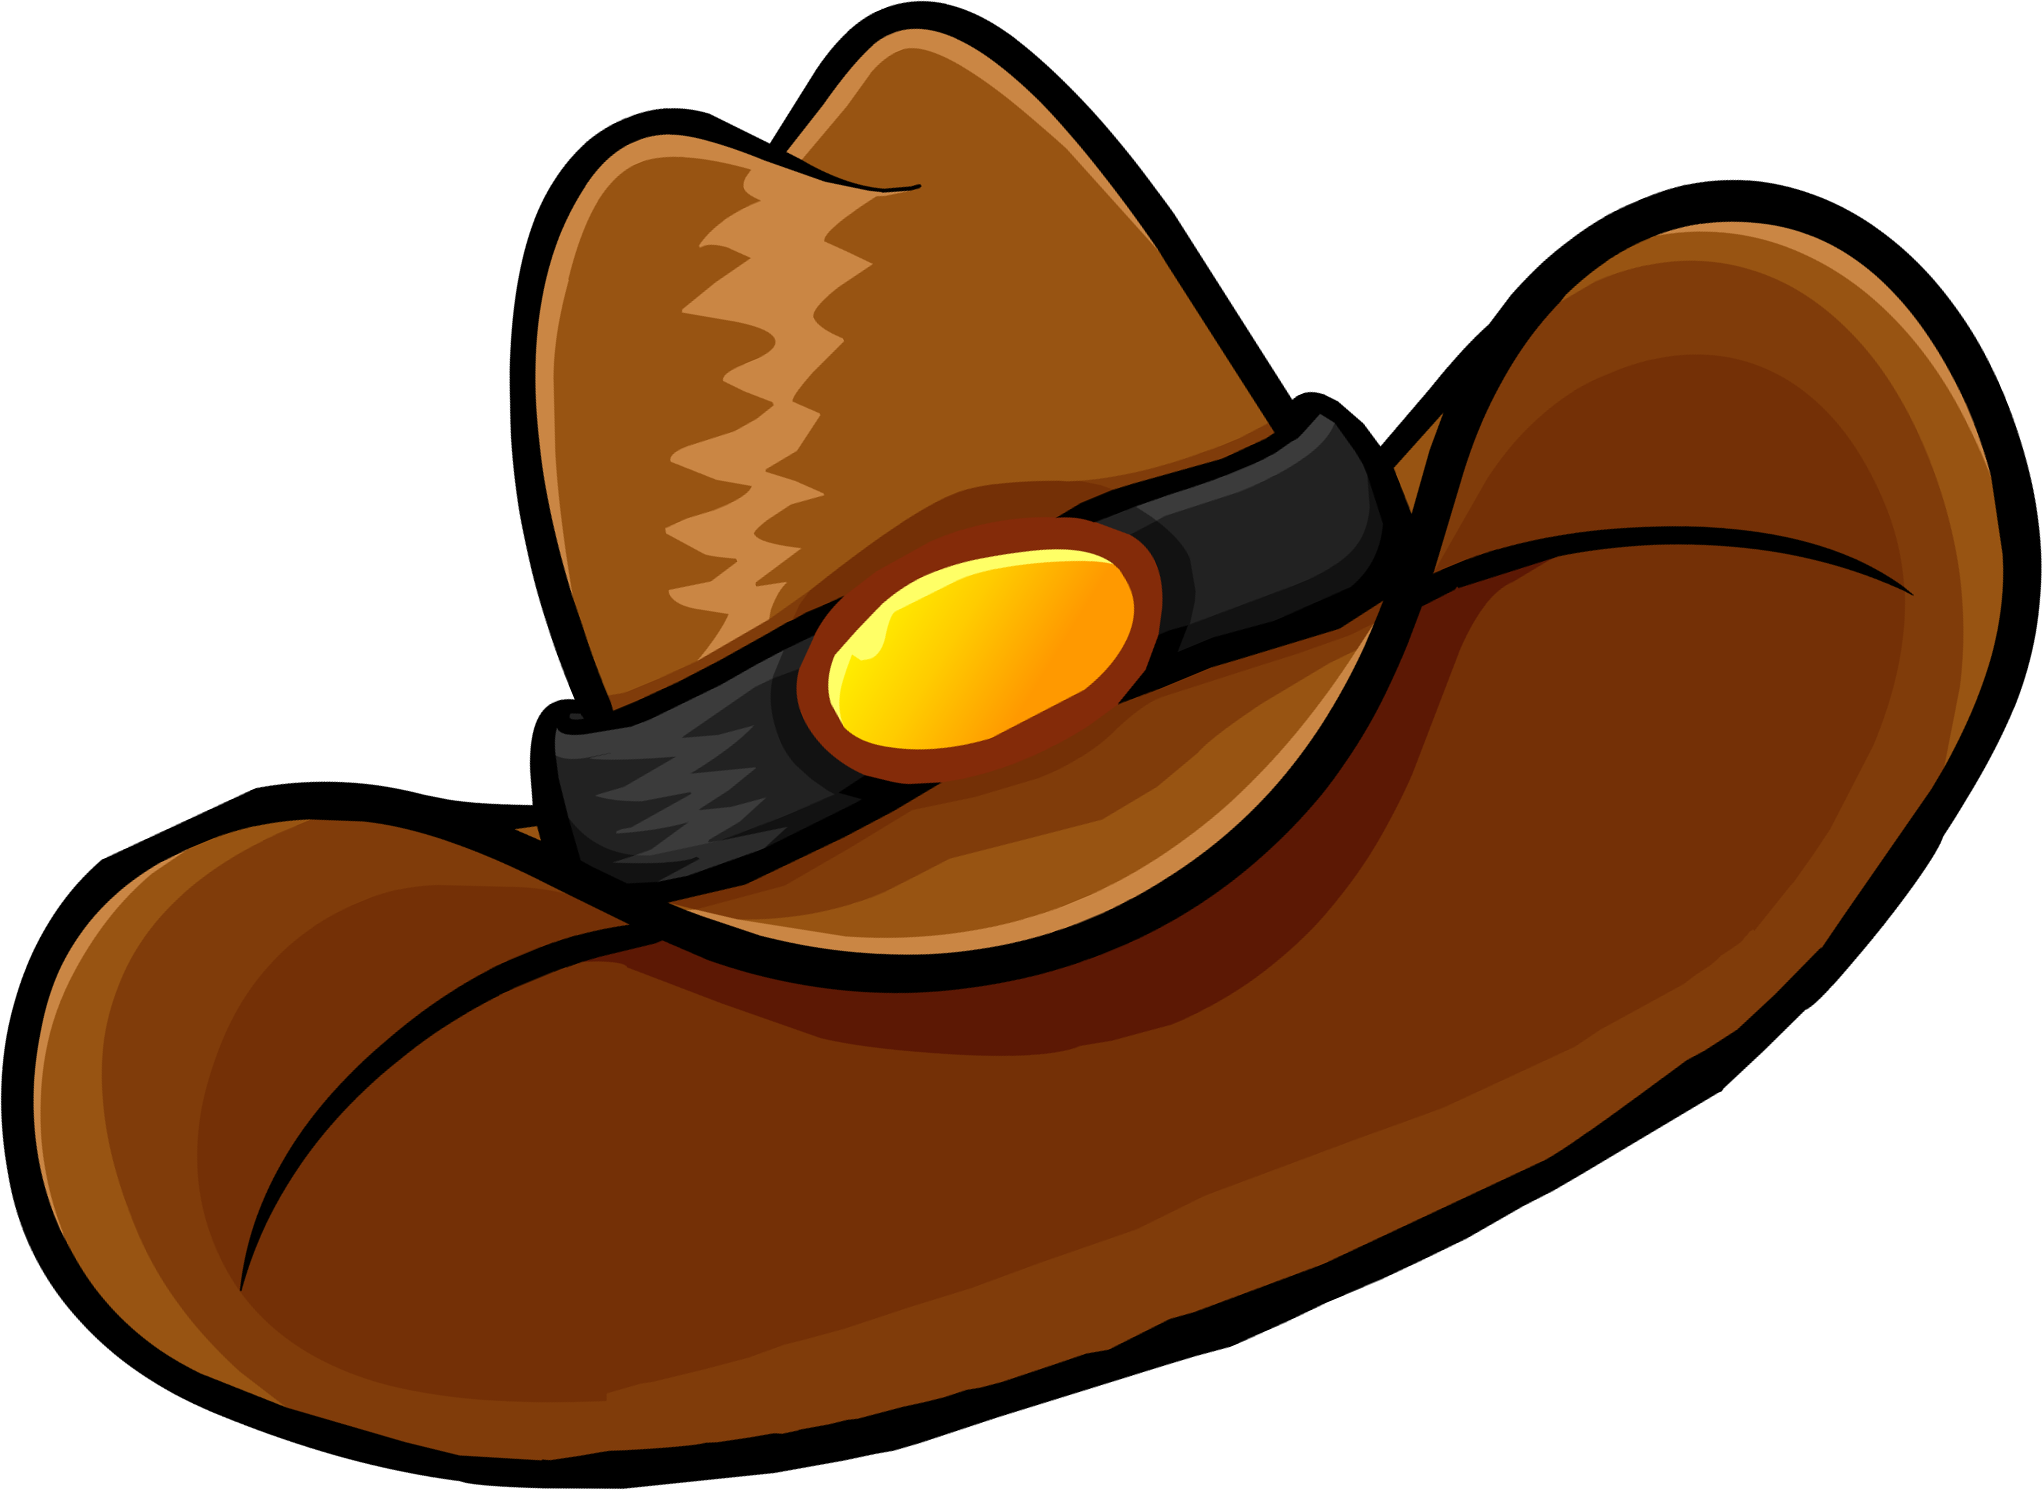 Brown Cowboy Hat - Club Penguin Wiki - The free, editable ...